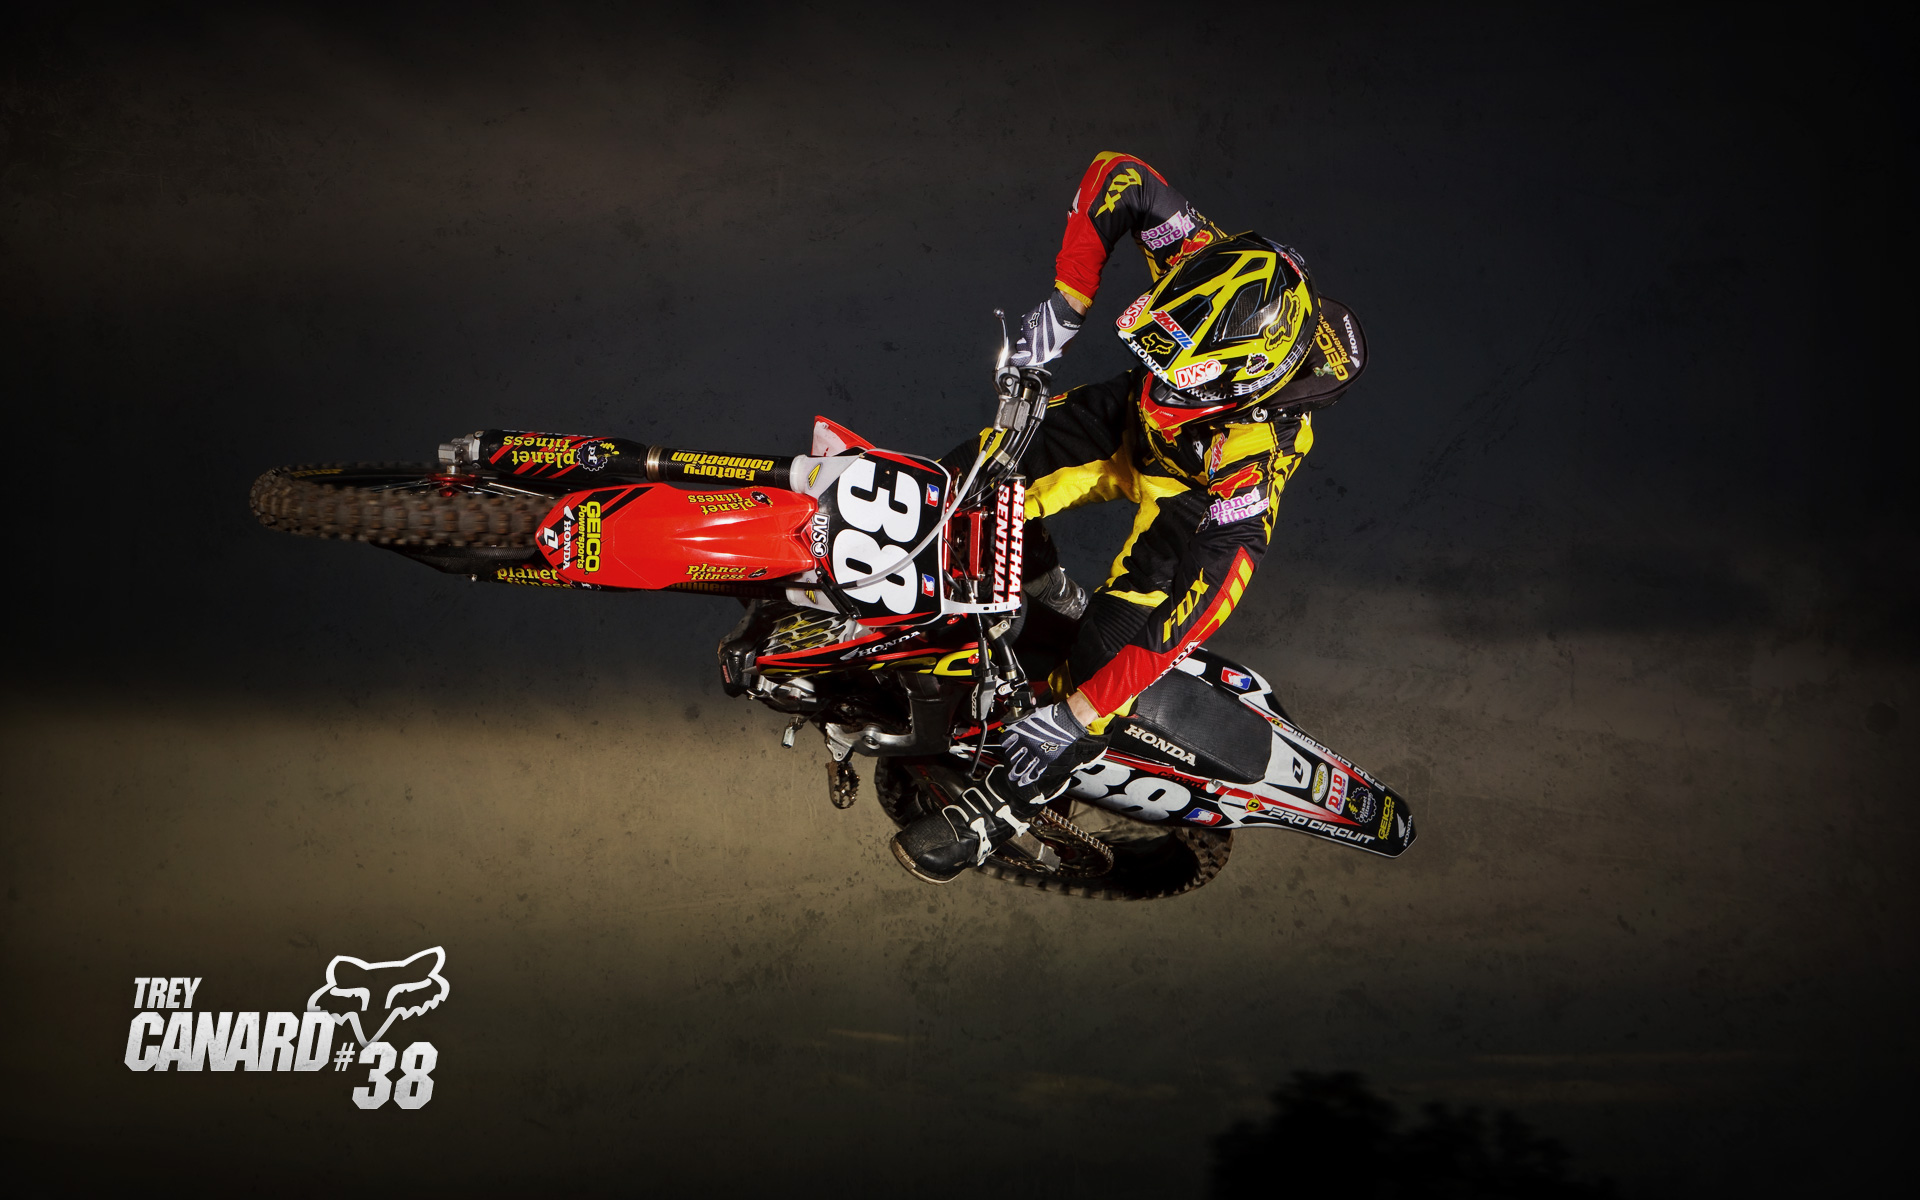 2015 Sx photo countdown - Moto-Related - Motocross Forums ...